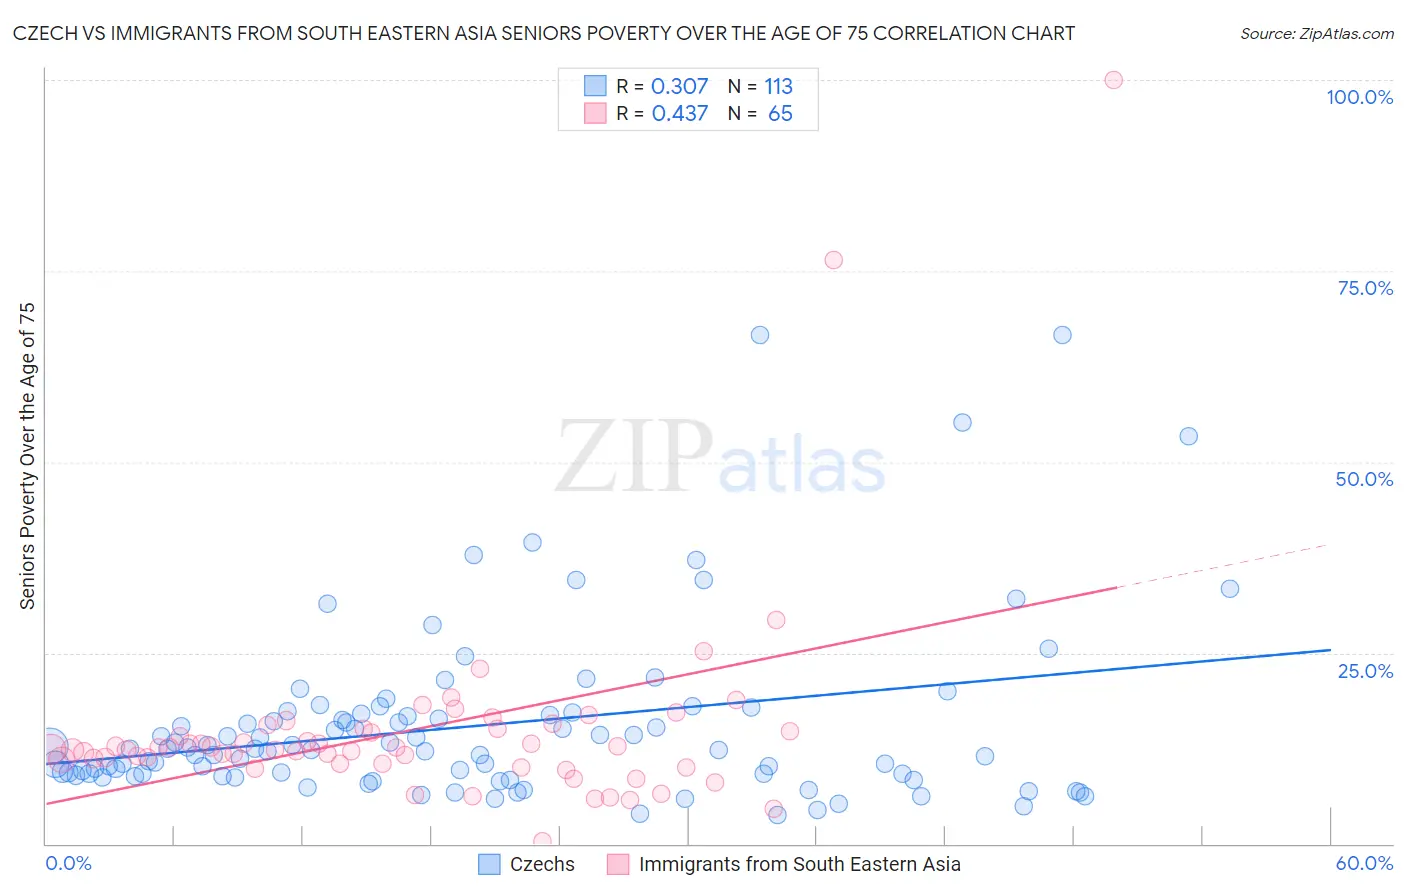 Czech vs Immigrants from South Eastern Asia Seniors Poverty Over the Age of 75